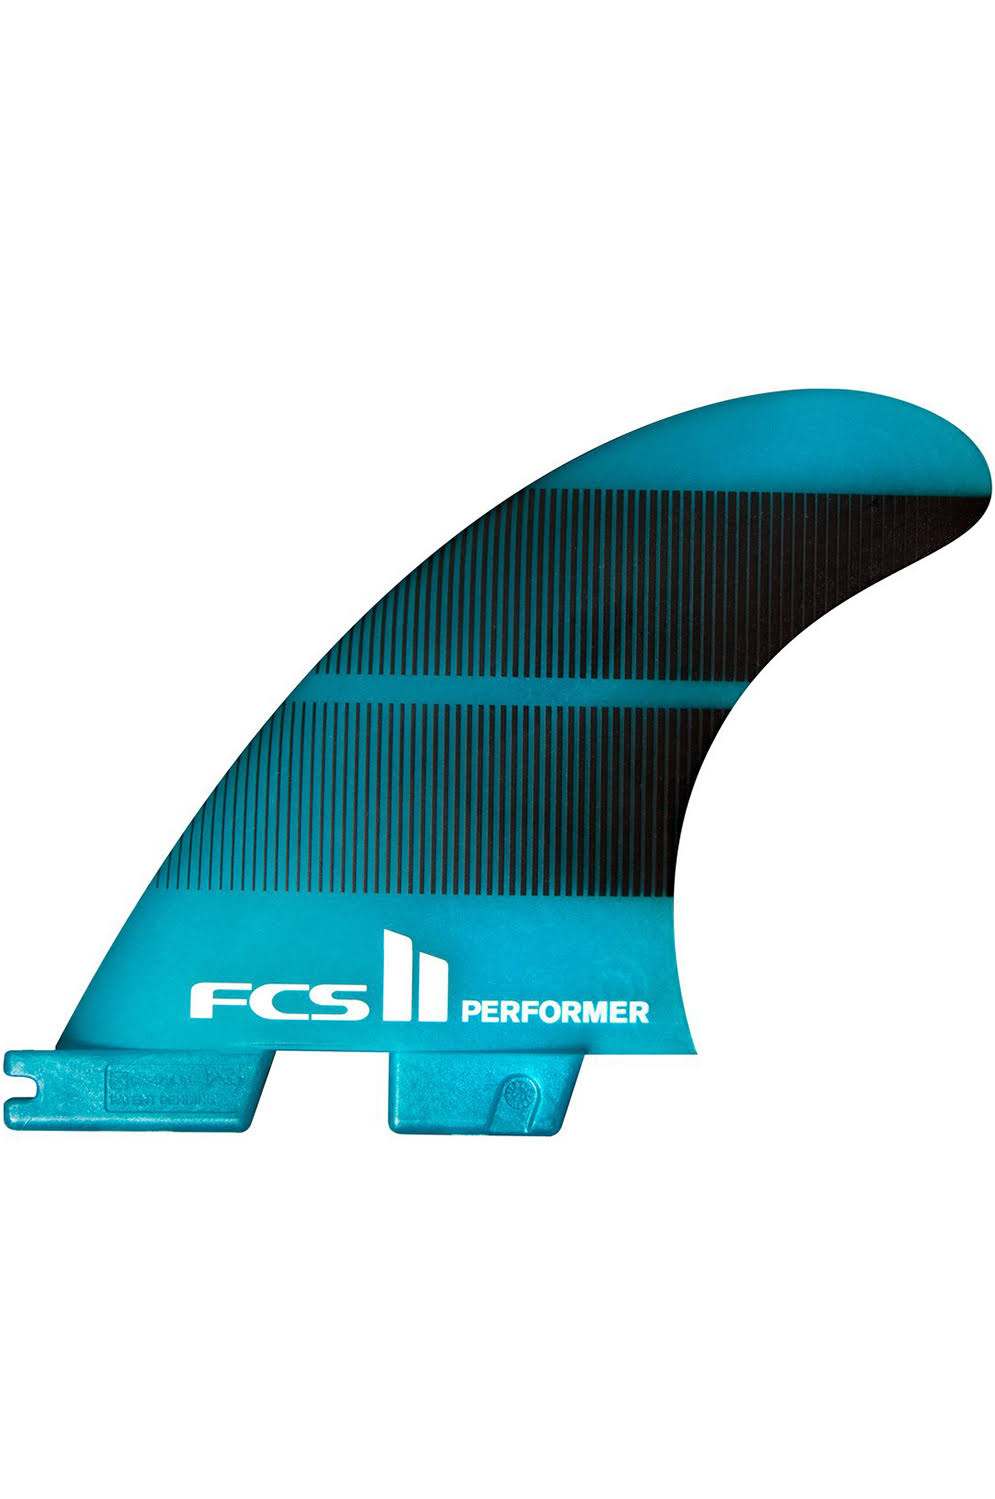 FCS II Performer Neo Glass Thruster Tri Fin, Small / Teal